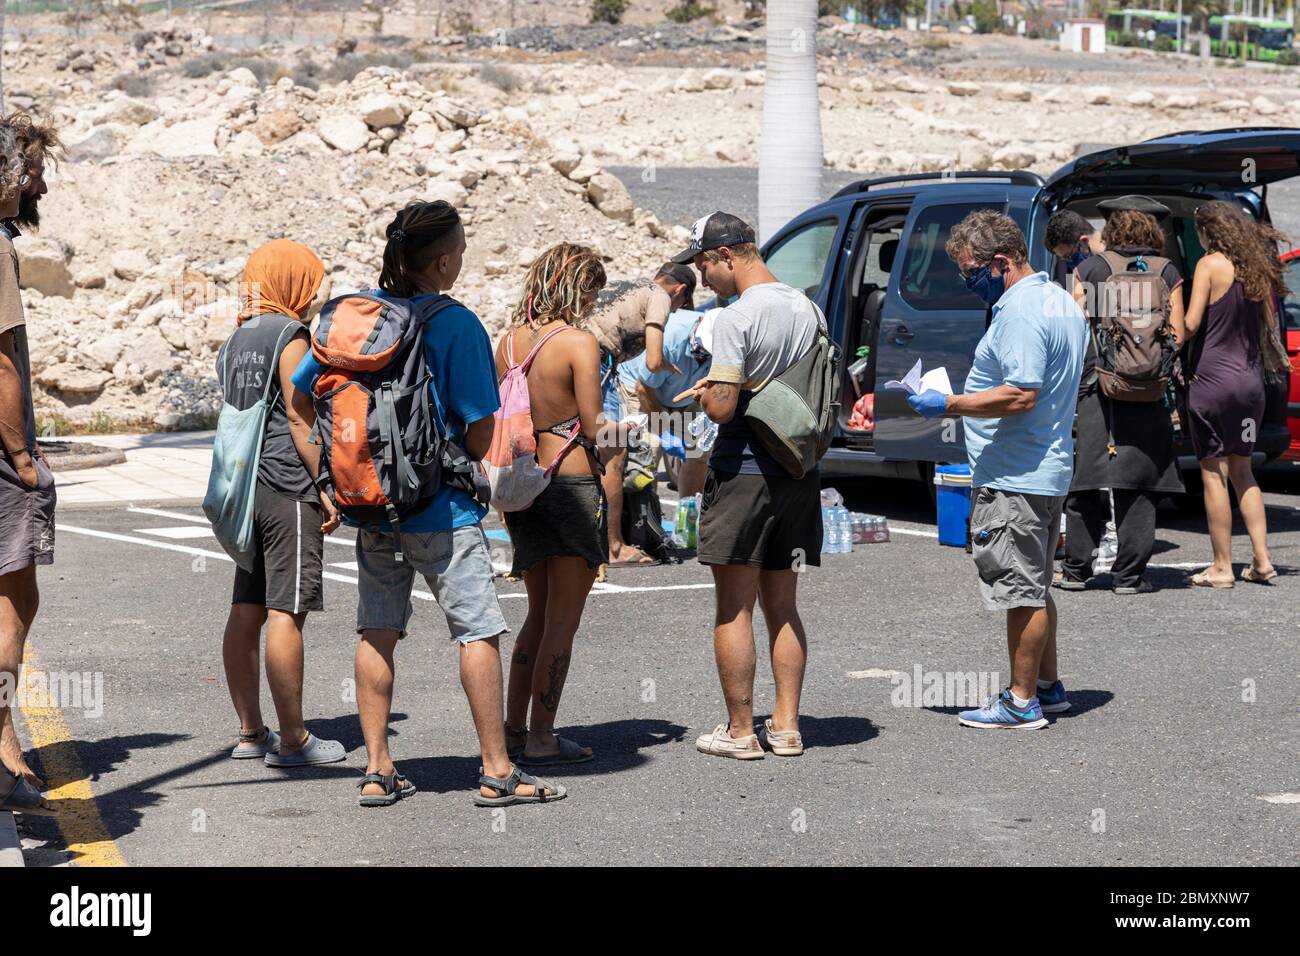 La Caleta, Costa Adeje, Tenerife, Canary Islands. 11 May 2020. Food bank charity El Arca de Noe, Noahs Ark, run by British residents provide food, water and soft drinks to a group of homeless people living rough along the Costa Adeje coastline. They rely on donations from local businesses and distribute basic foodstuffs to over a hundred people three times a week. Stock Photo